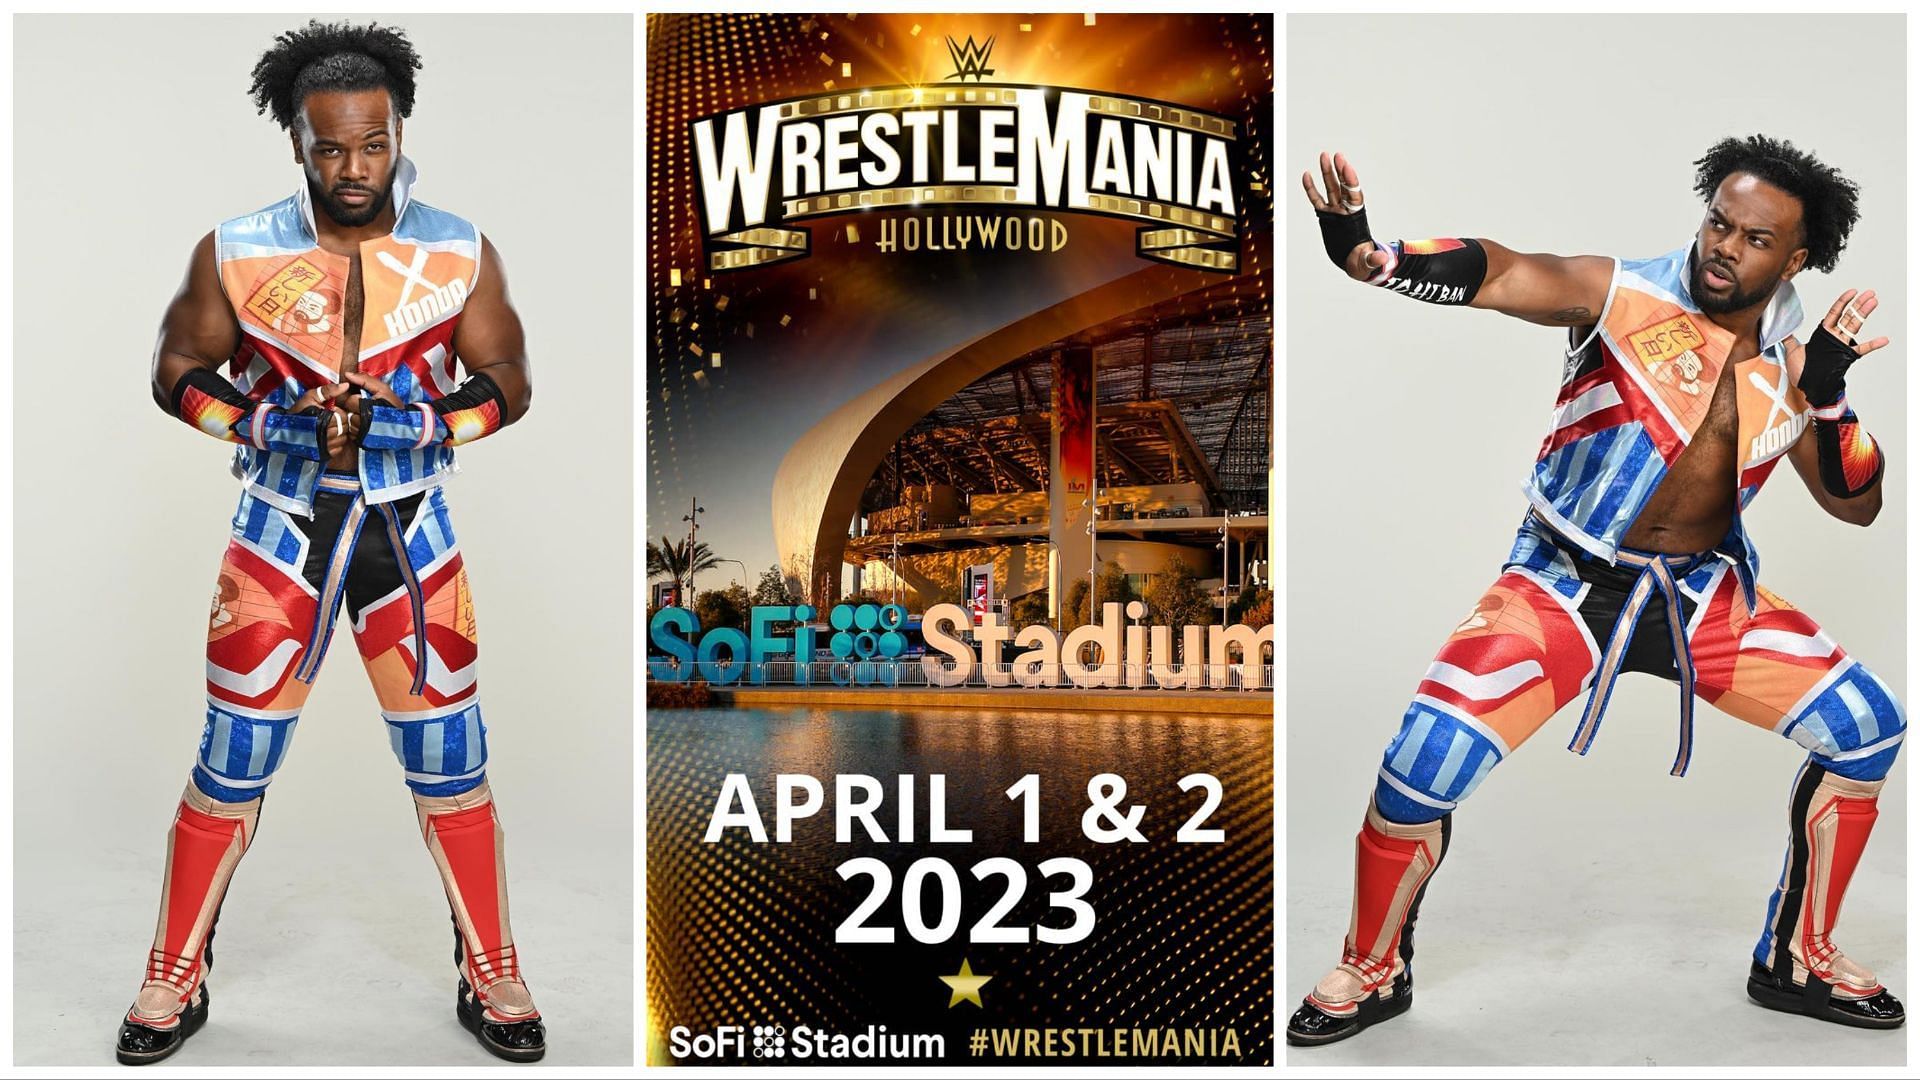 Xavier Woods on the road to WWE WrestleMania 39